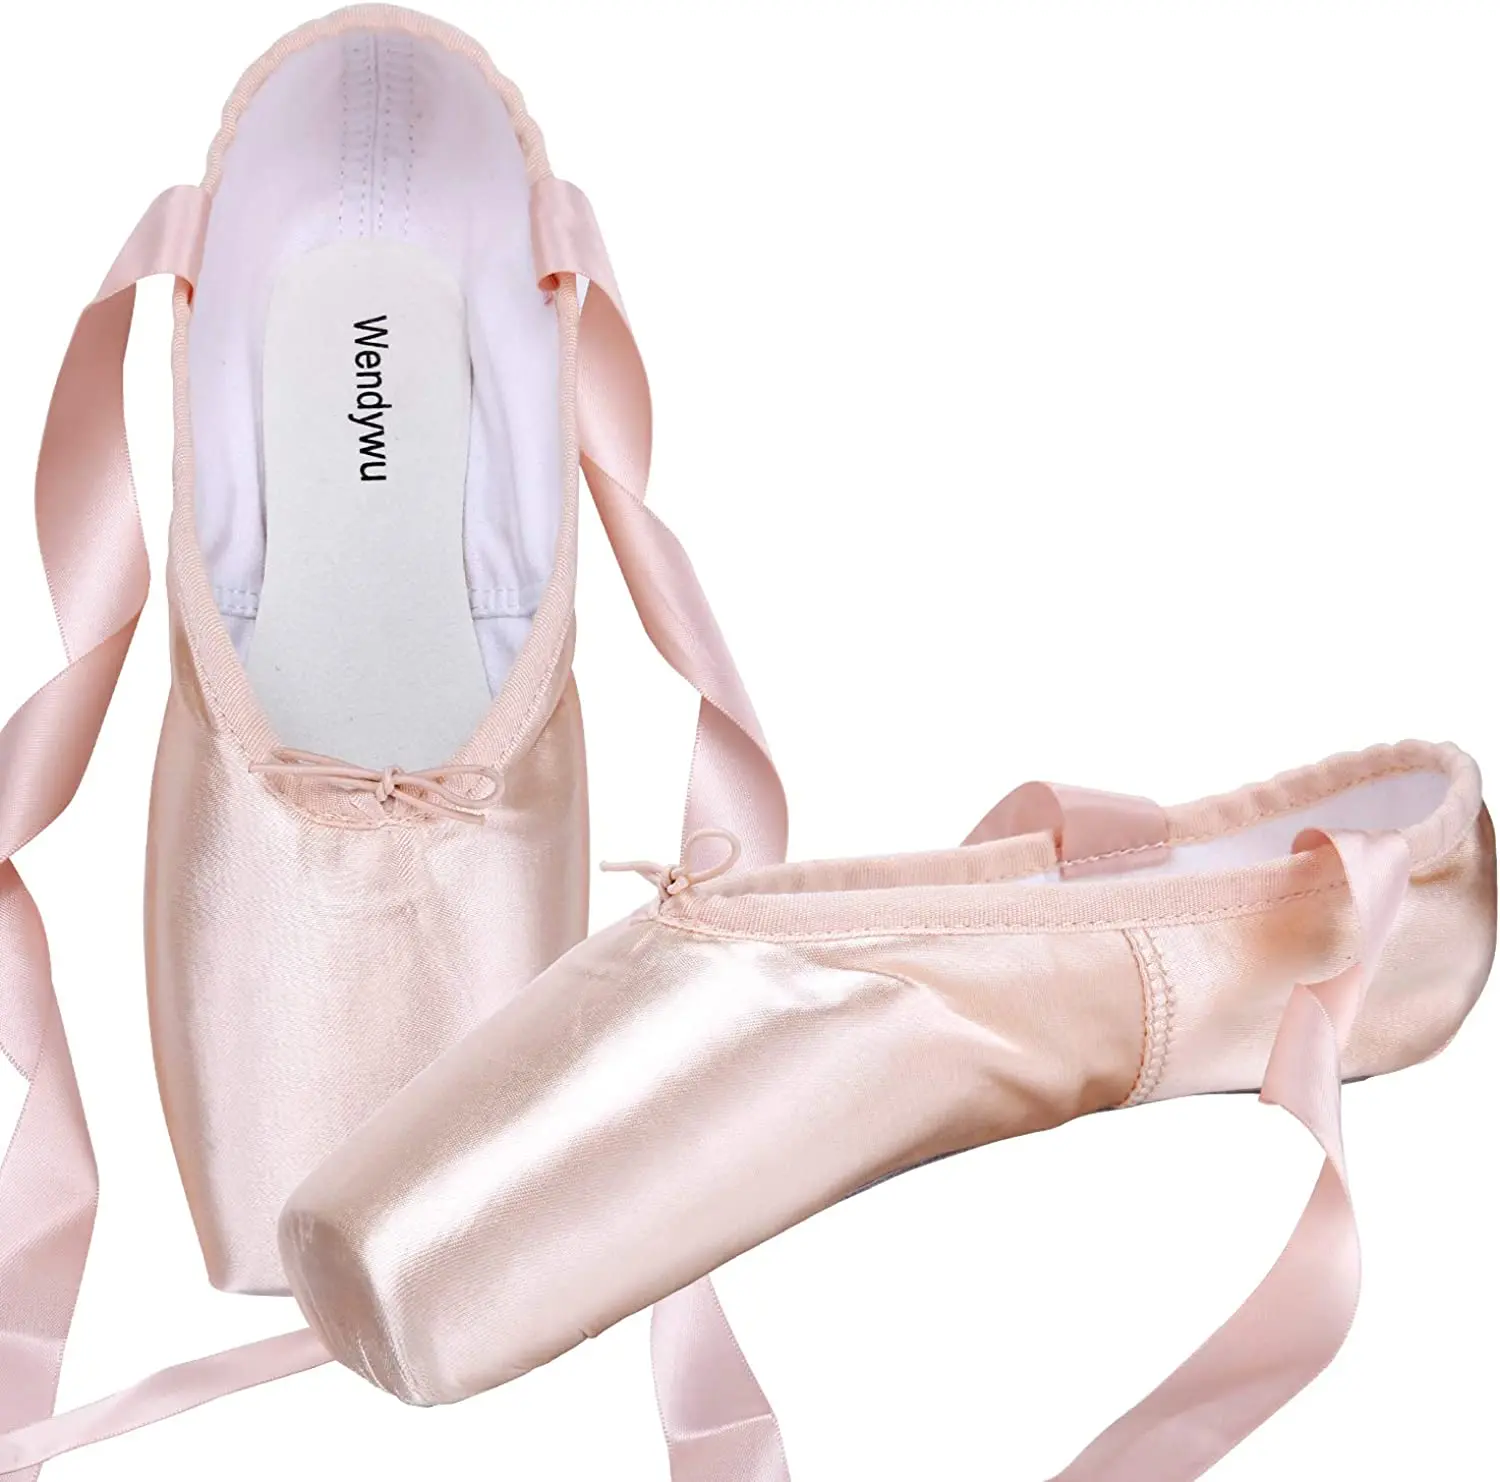 Wholesale Professional Ballet Slipper Dance Shoe Pink Ballet Pointe Shoes From